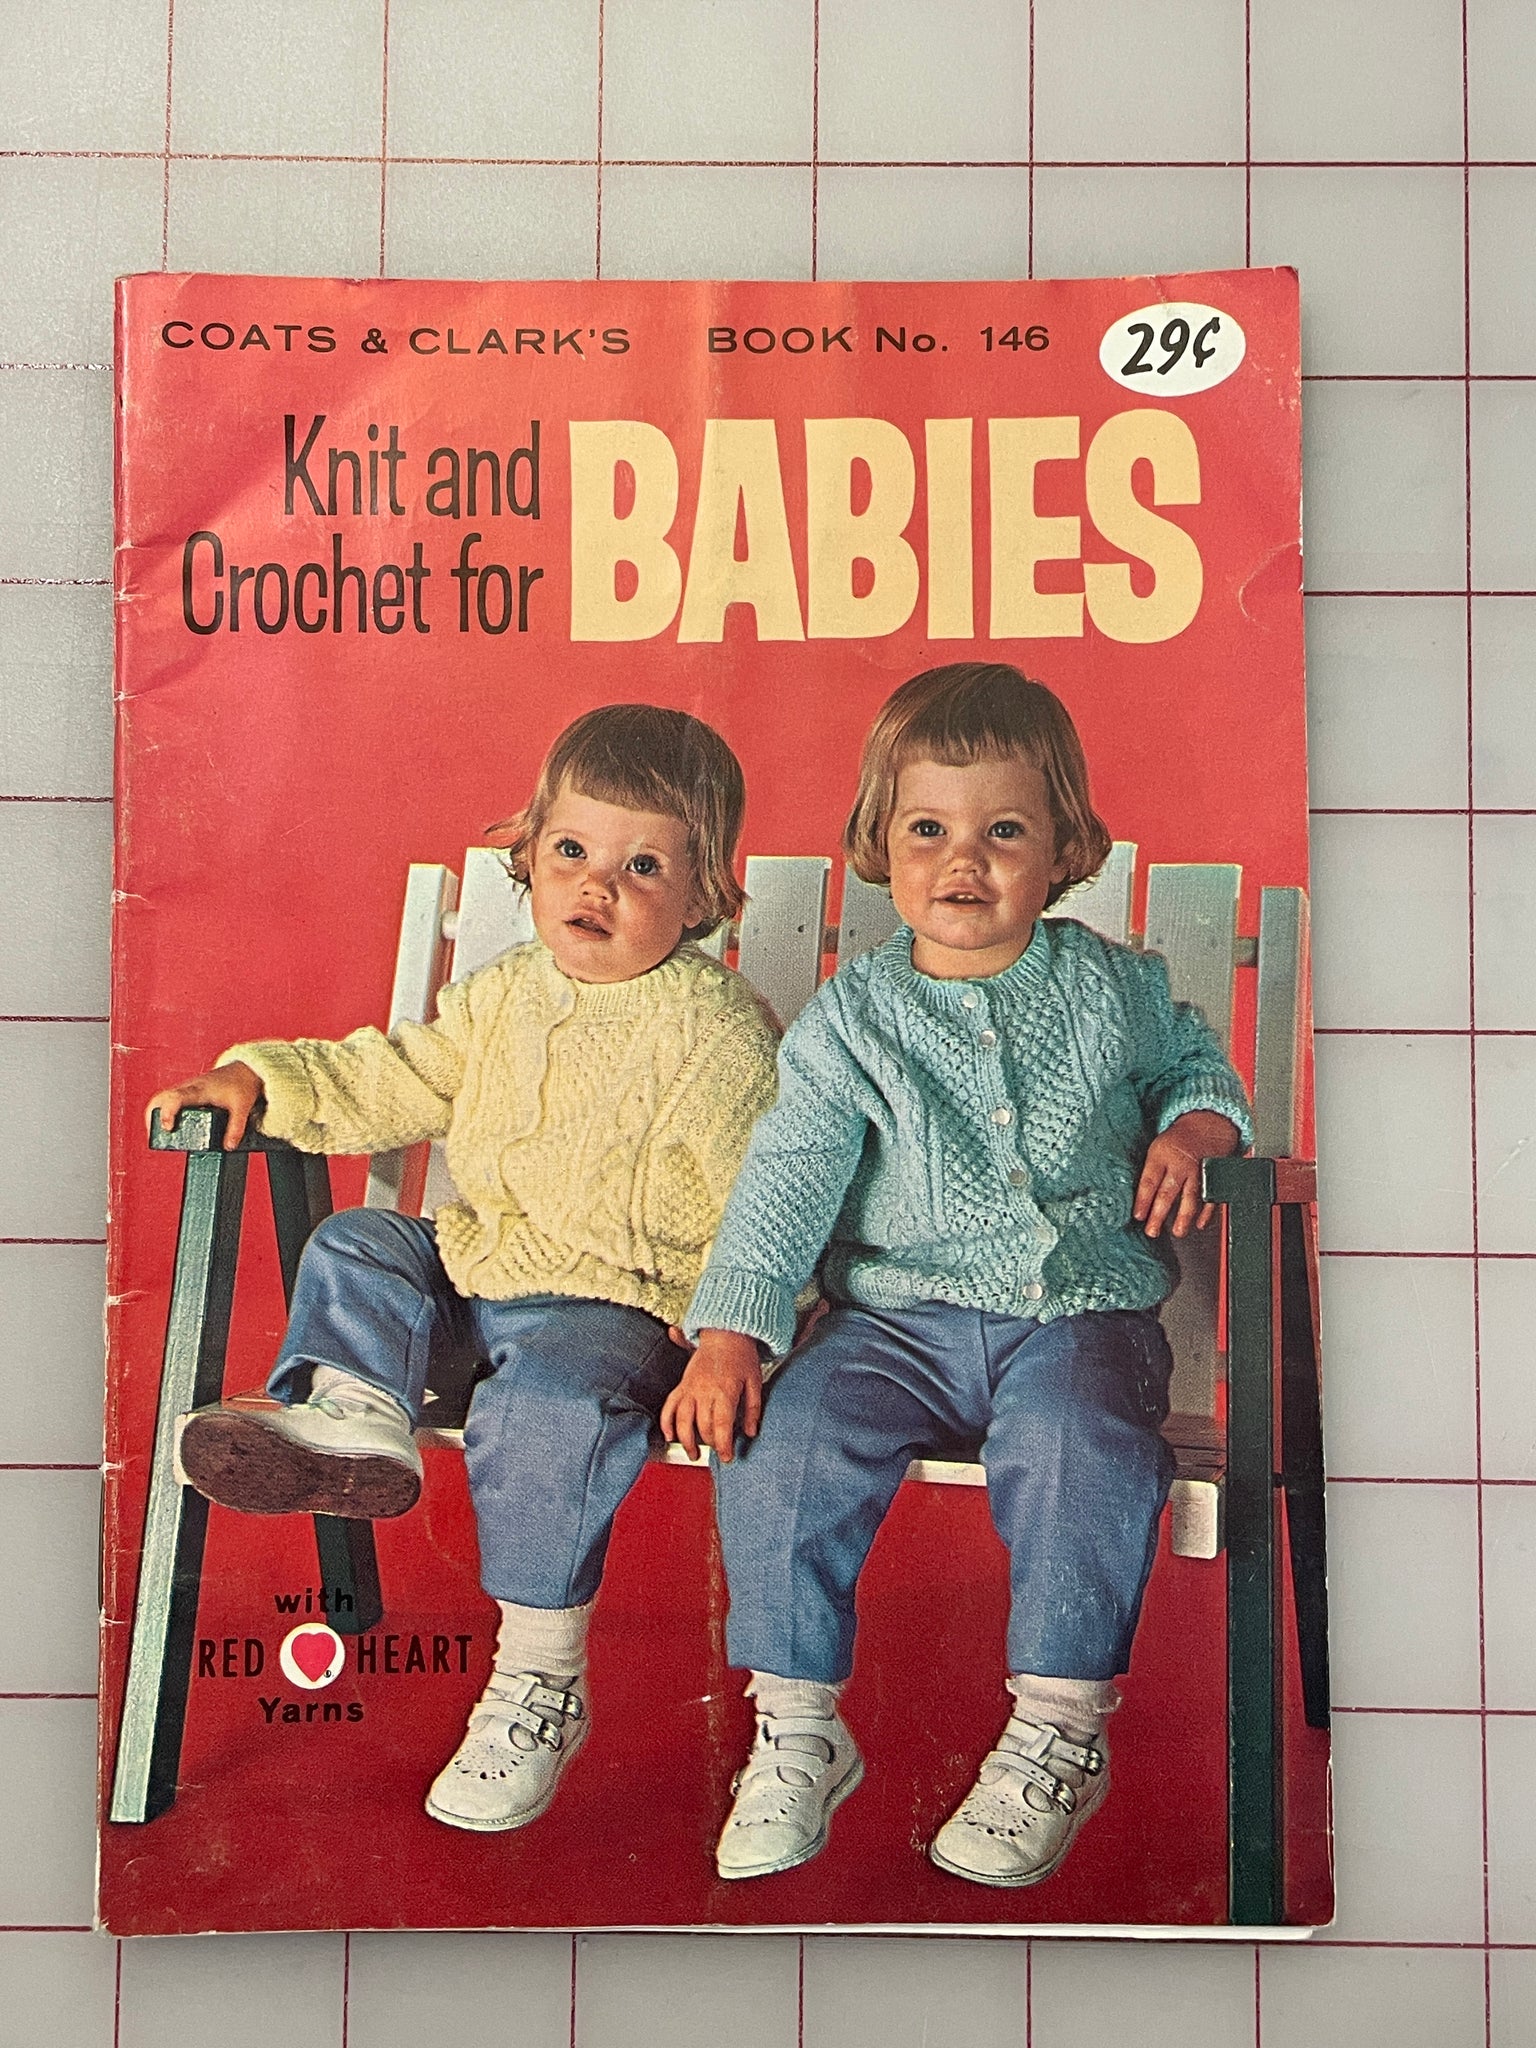 SALE 1964 Coats & Clark's Magazine - Knit and Crochet for Babies